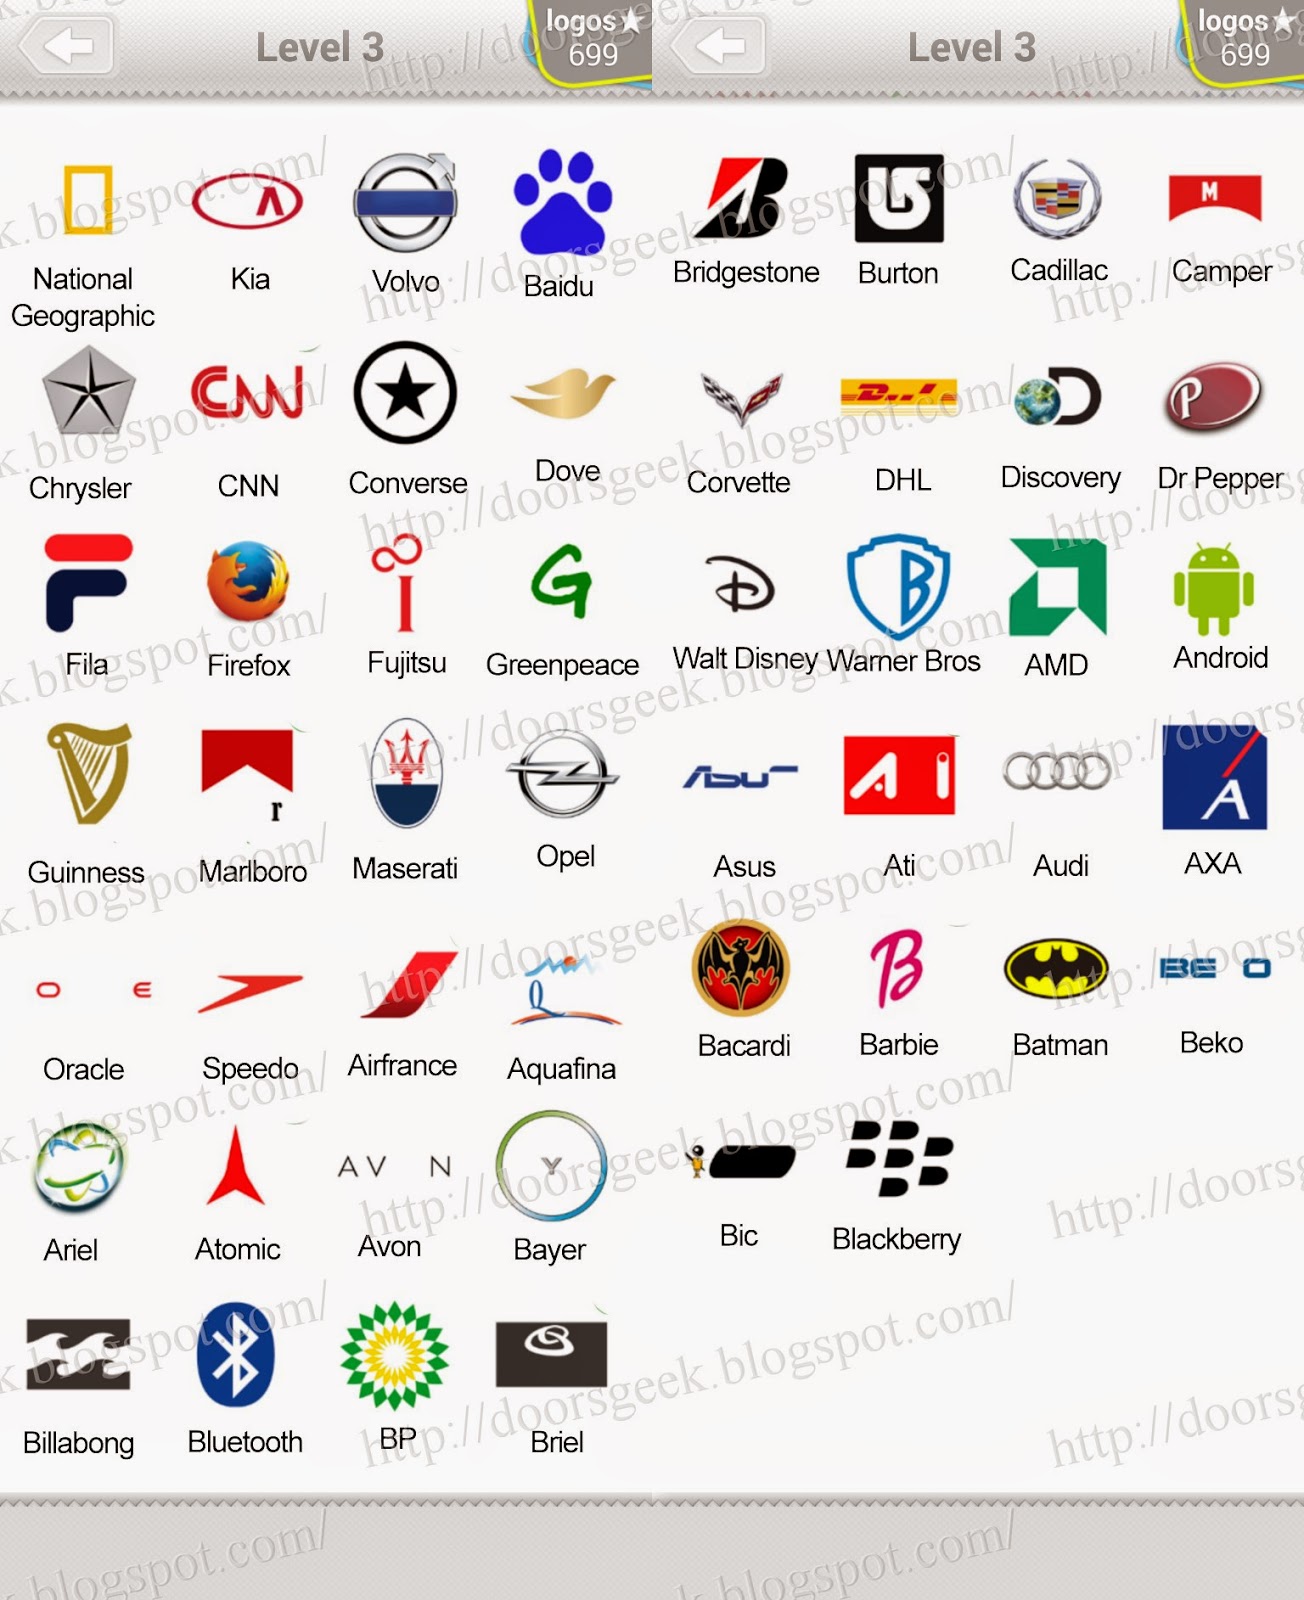 whats the logo answers